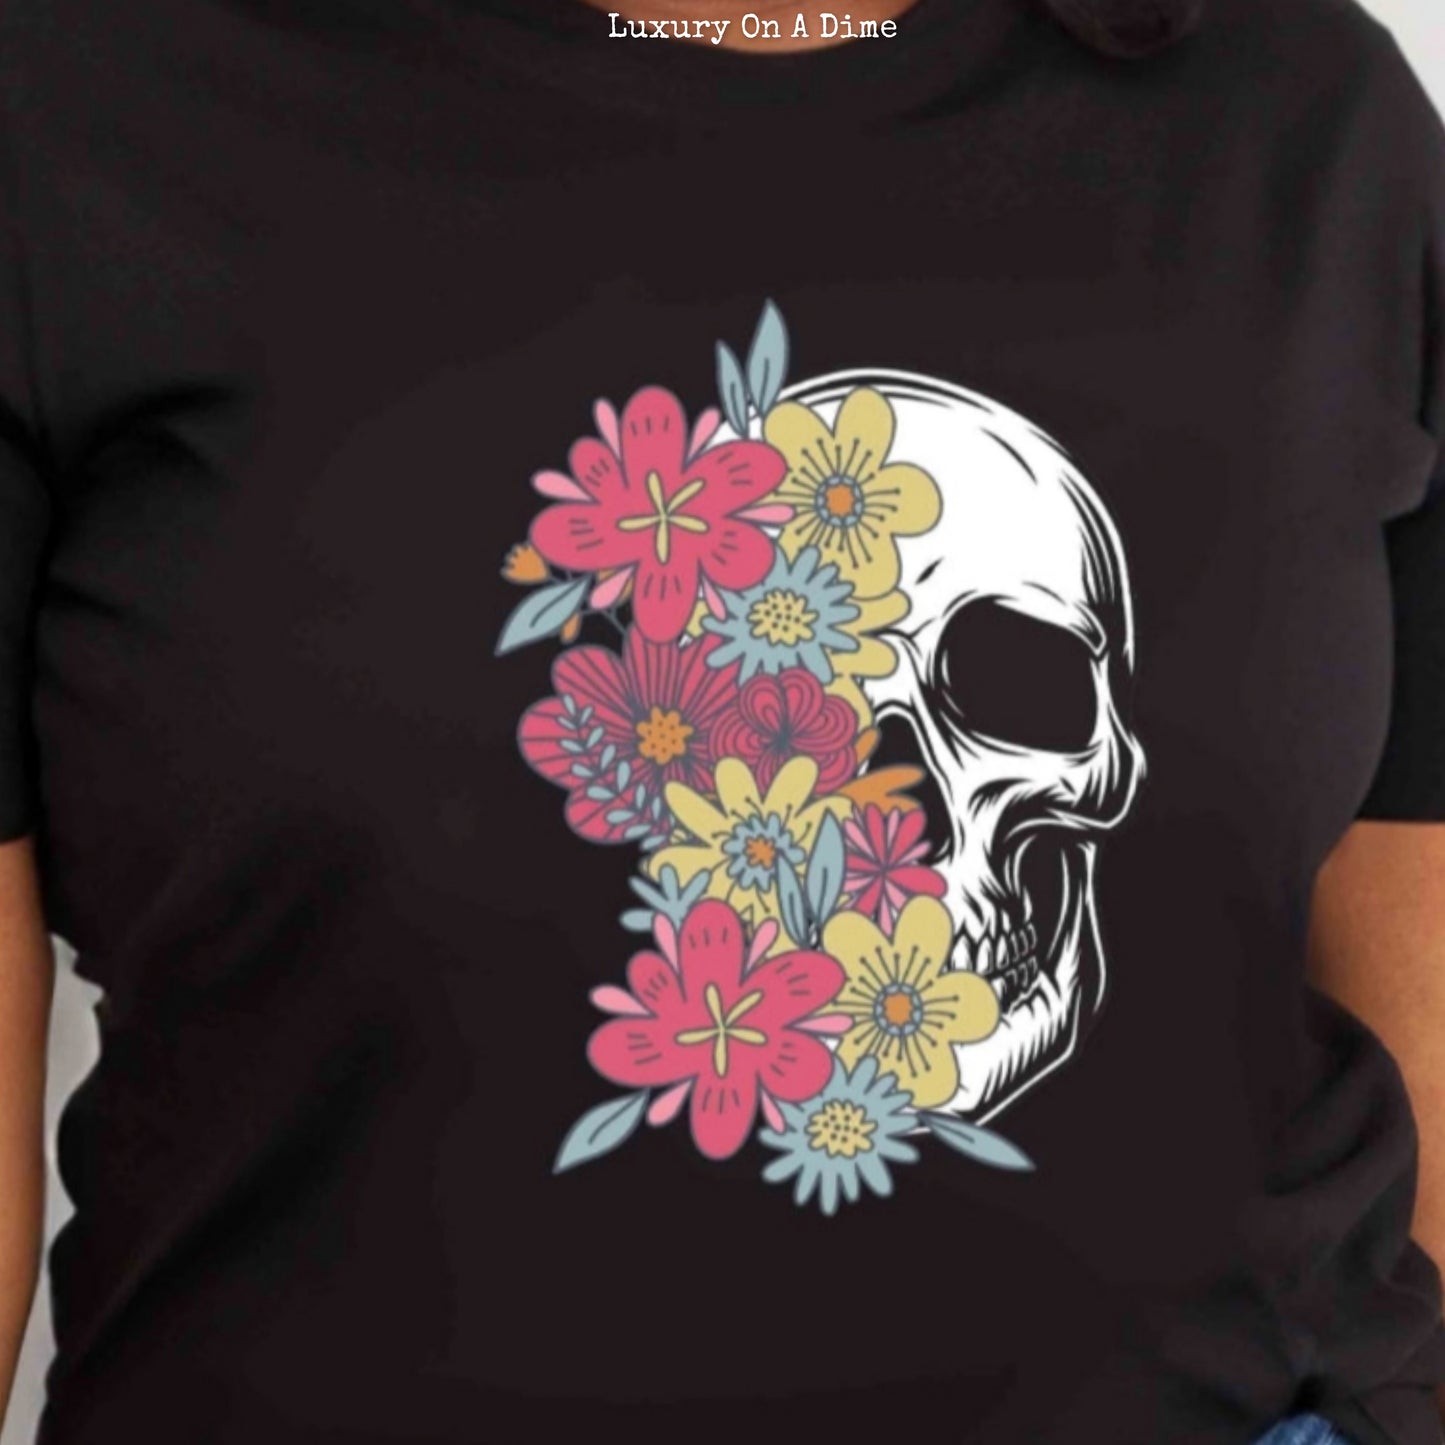 Colorful Floral Skull Graphic 100% Cotton Short Sleeve Tee Shirt (Plus Size Available)